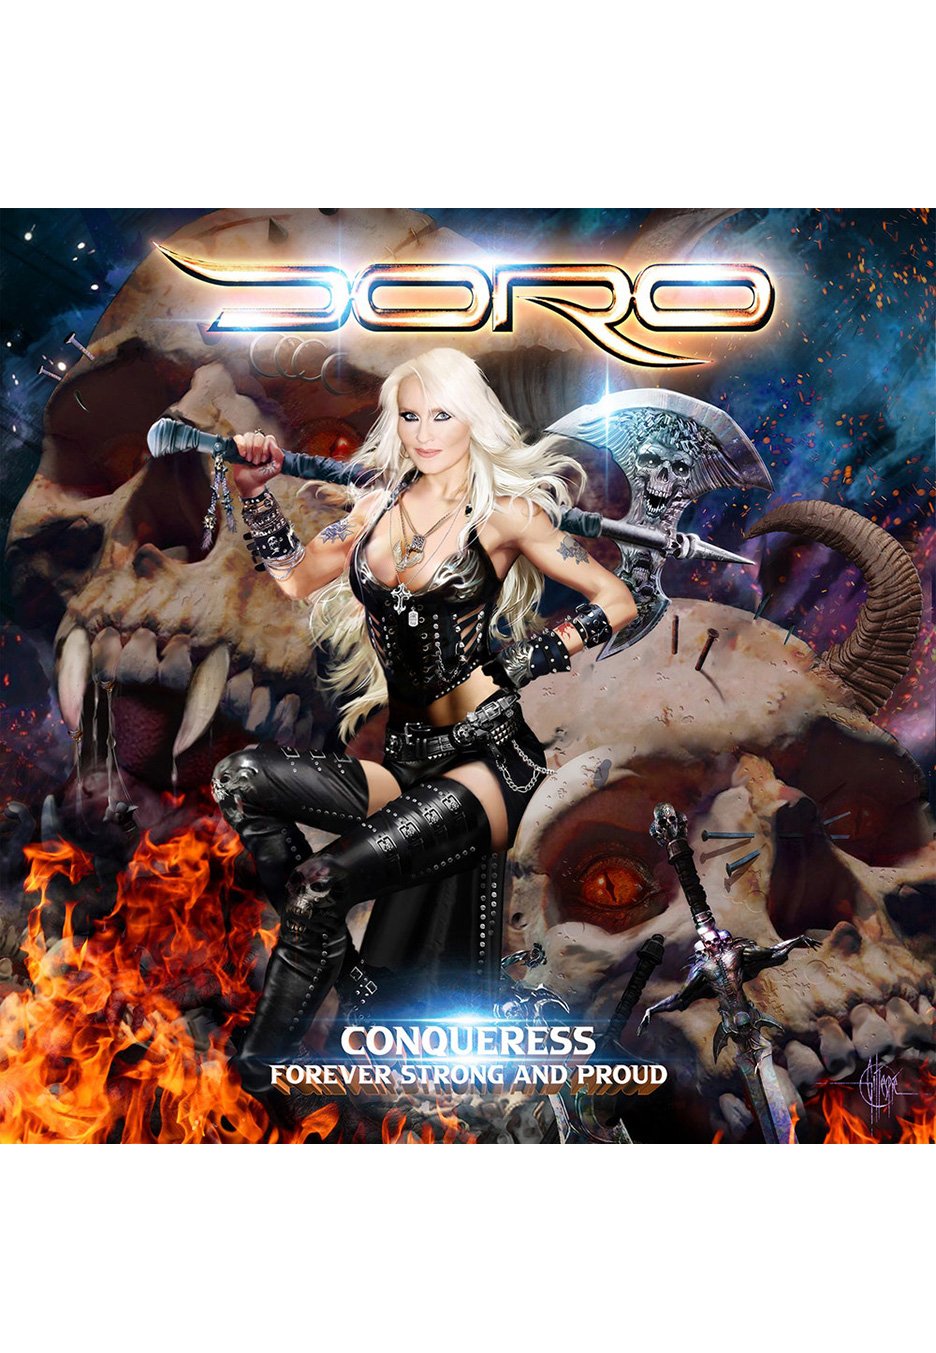 Doro - Conqueress: Forever Strong And Proud Ltd. White/Blue - Marbled 2 Vinyl